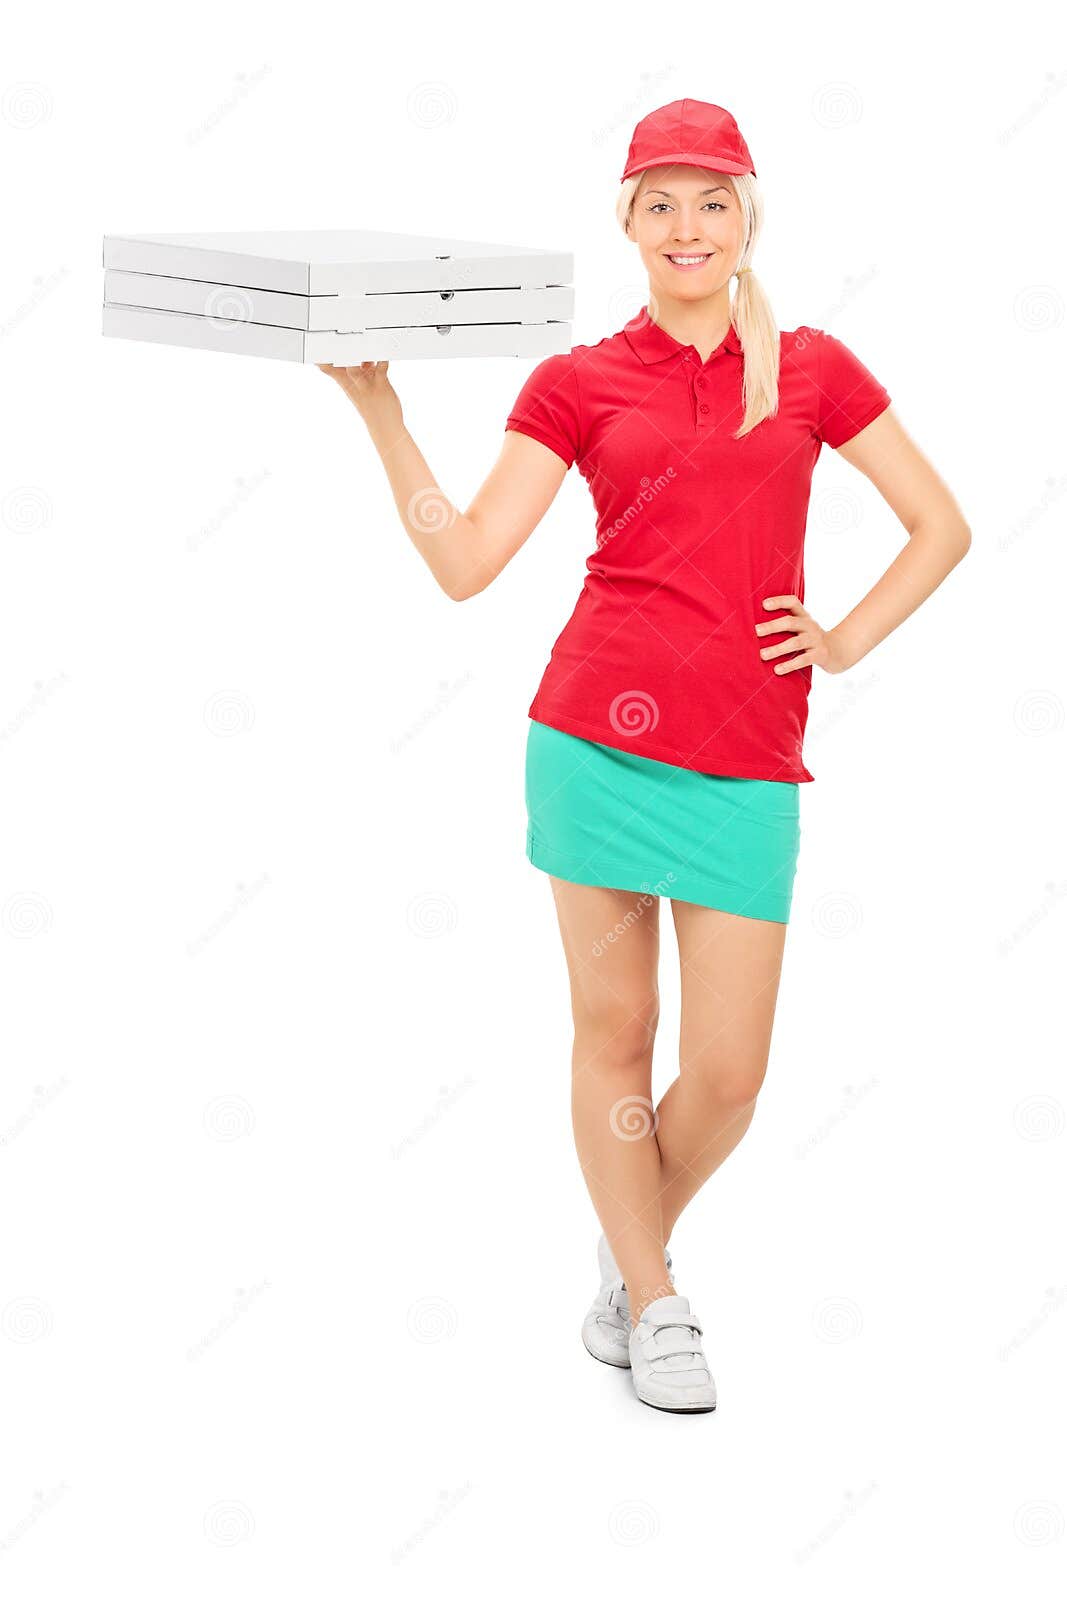 pizza-delivery-girl-holding-boxes-full-l